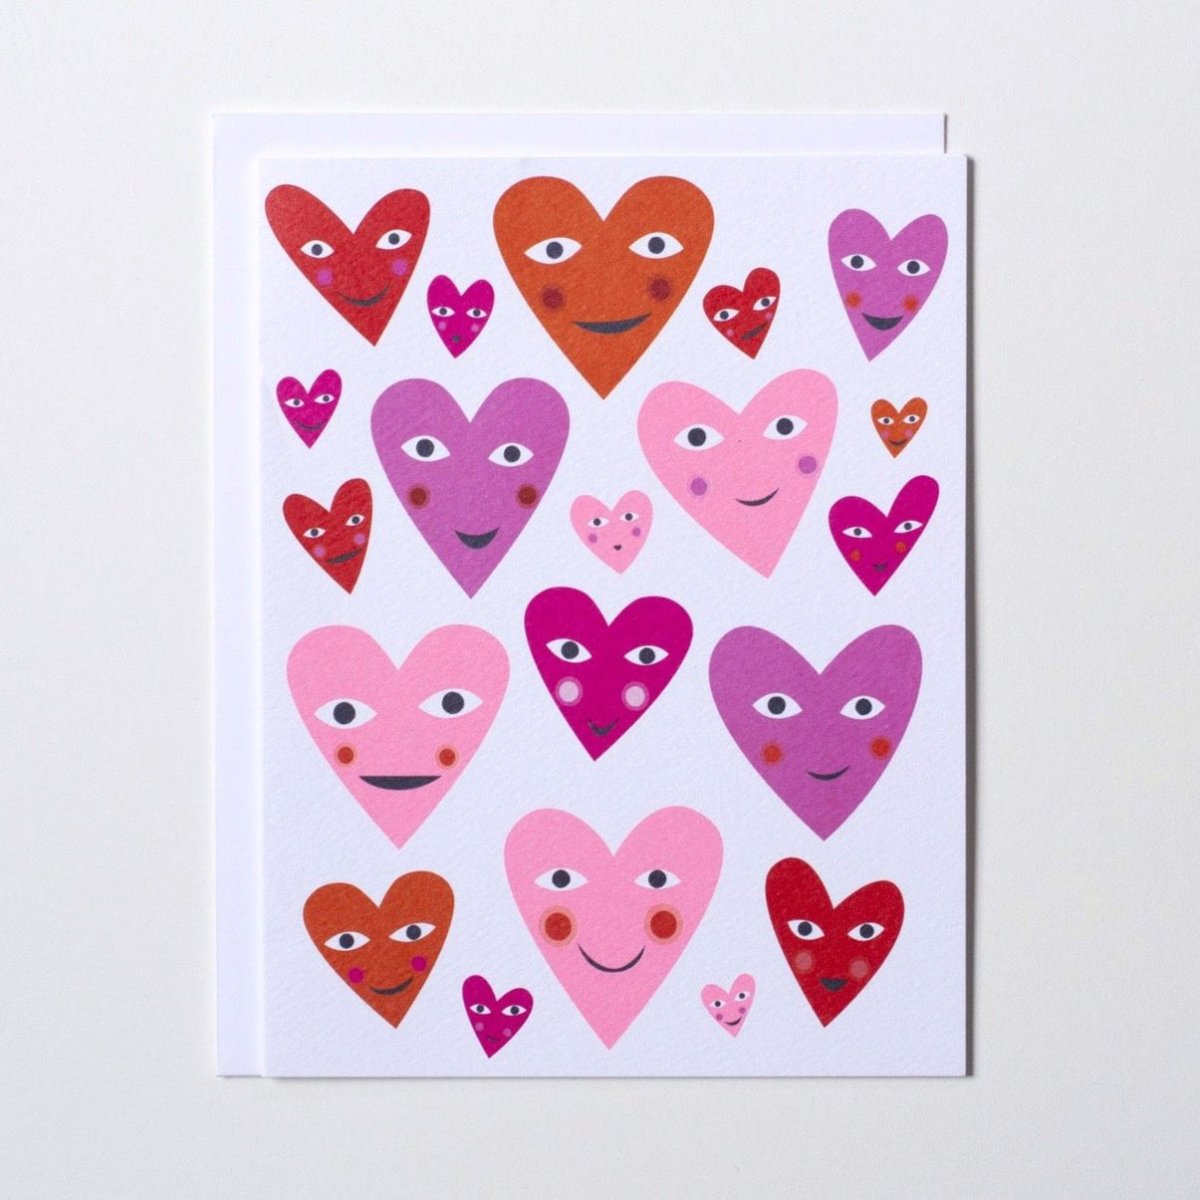 White card with bright pink, red and purple smiley face hearts. Made with recycled paper by Banquet Atelier in Vancouver, British Columbia, Canada.